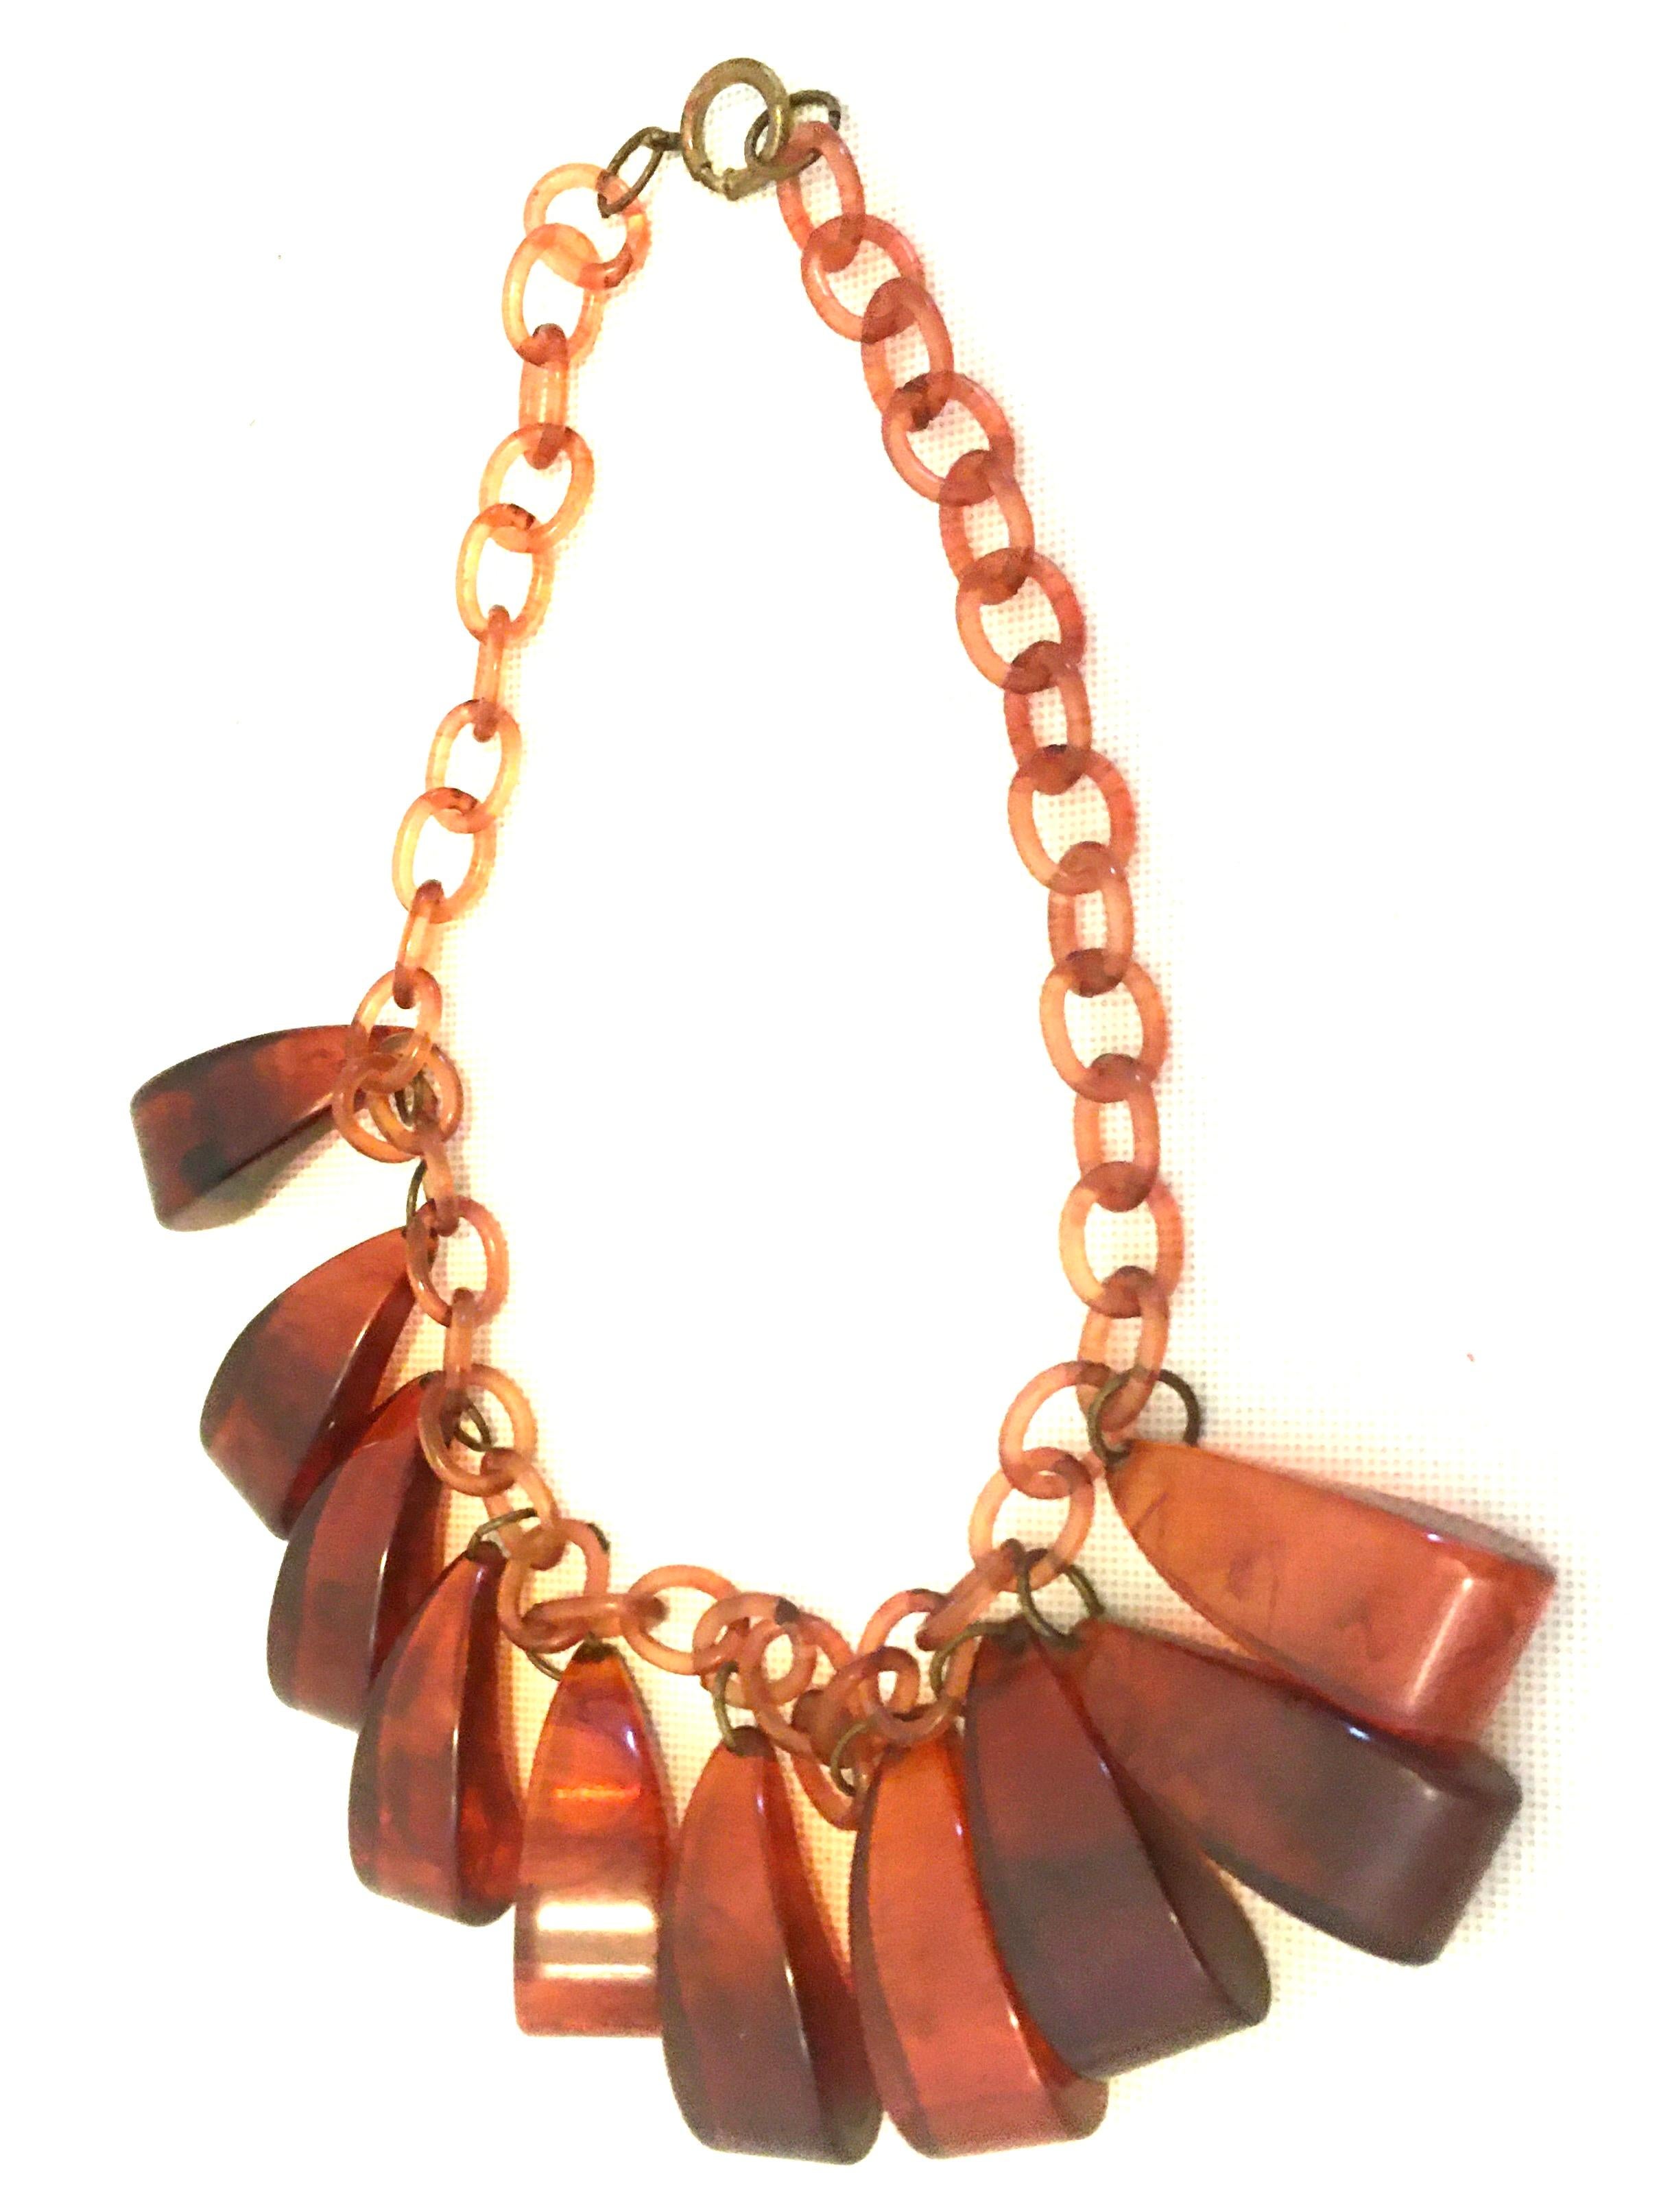 celluloid jewelry